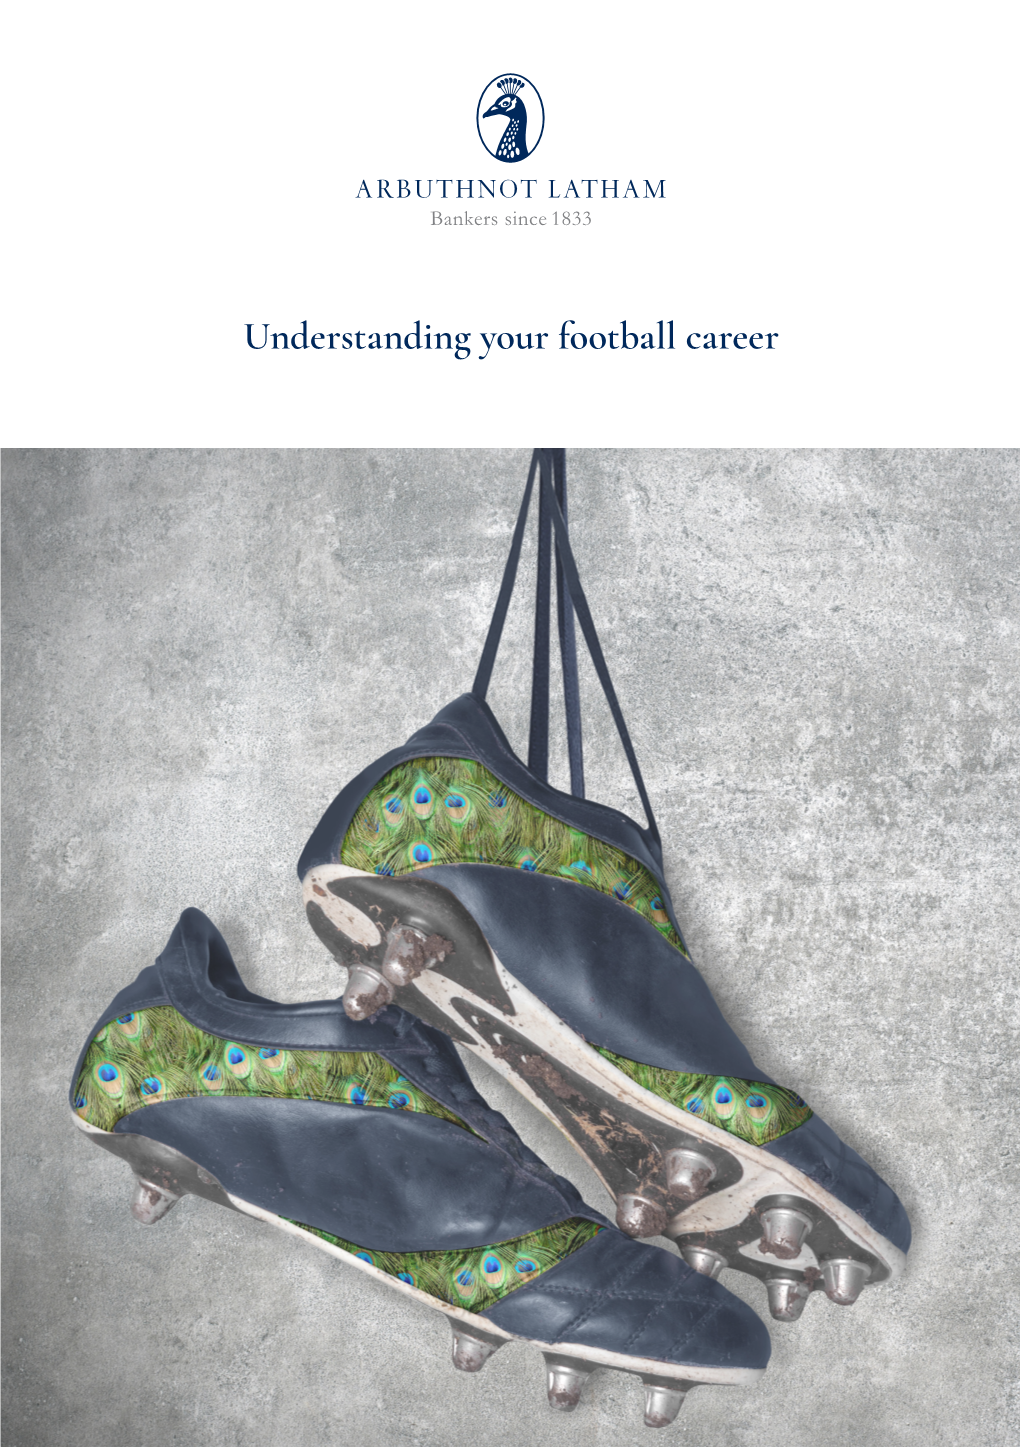 Understanding Your Football Career We Have Chosen to Partner with Arbuthnot Latham Due in Large “ Part to the Breadth and Depth of Their Service Offering